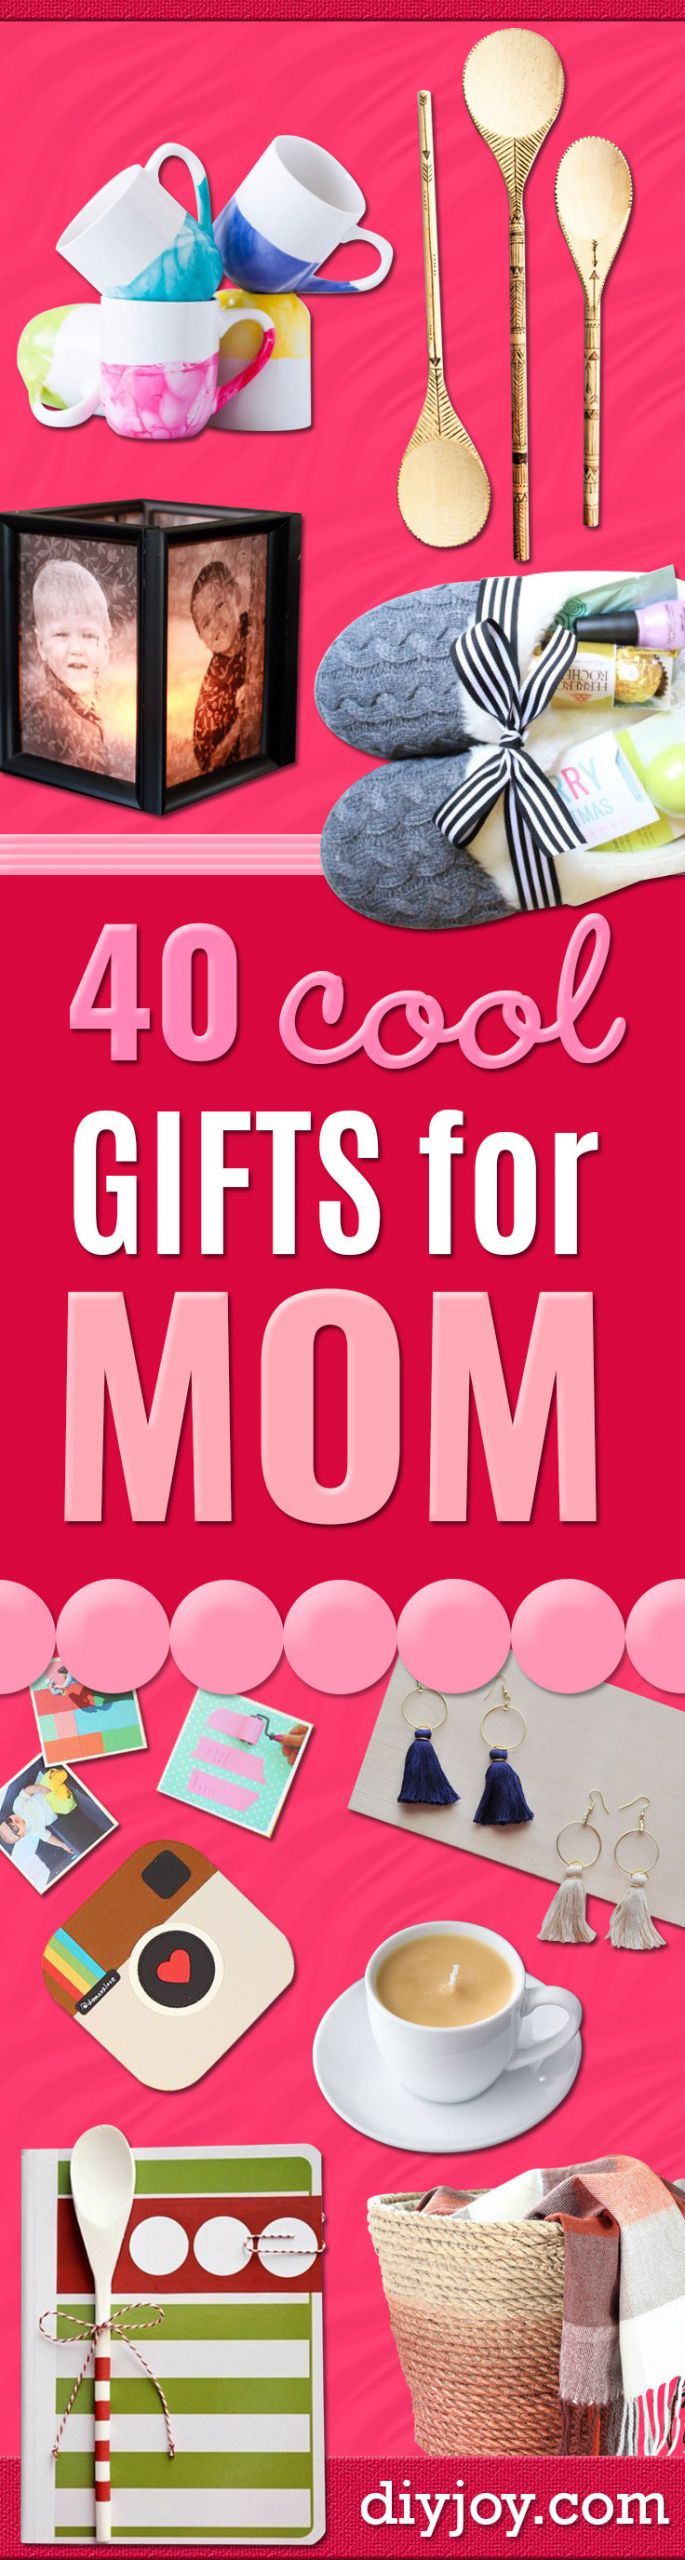 Ideas For Christmas Gift For Mom
 40 Coolest Gifts To Make for Mom